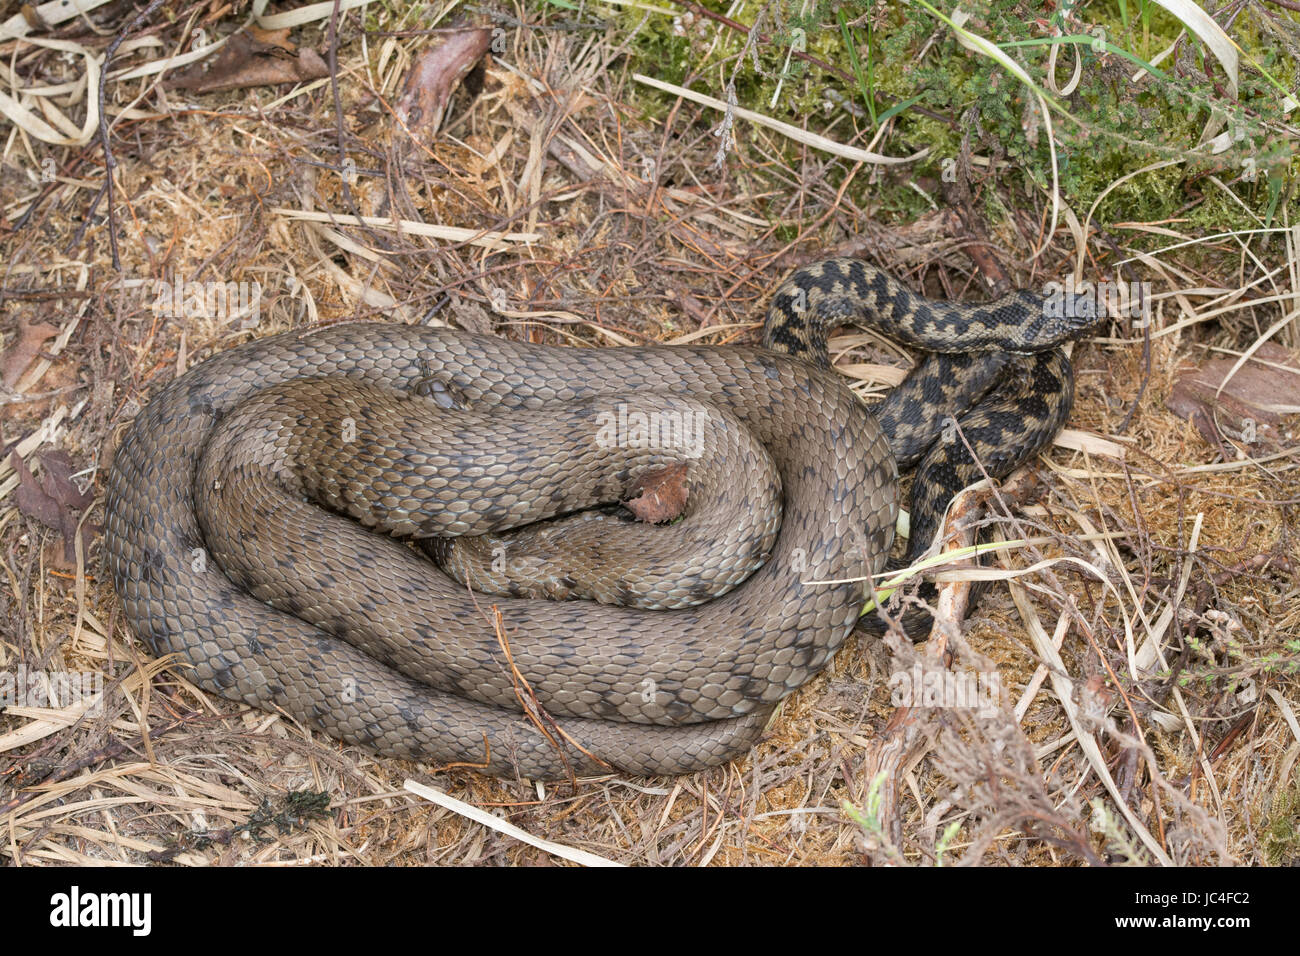 Grass snake (Natrix natrix) and adder (Vipera berus) coiled up together in Surrey Stock Photo